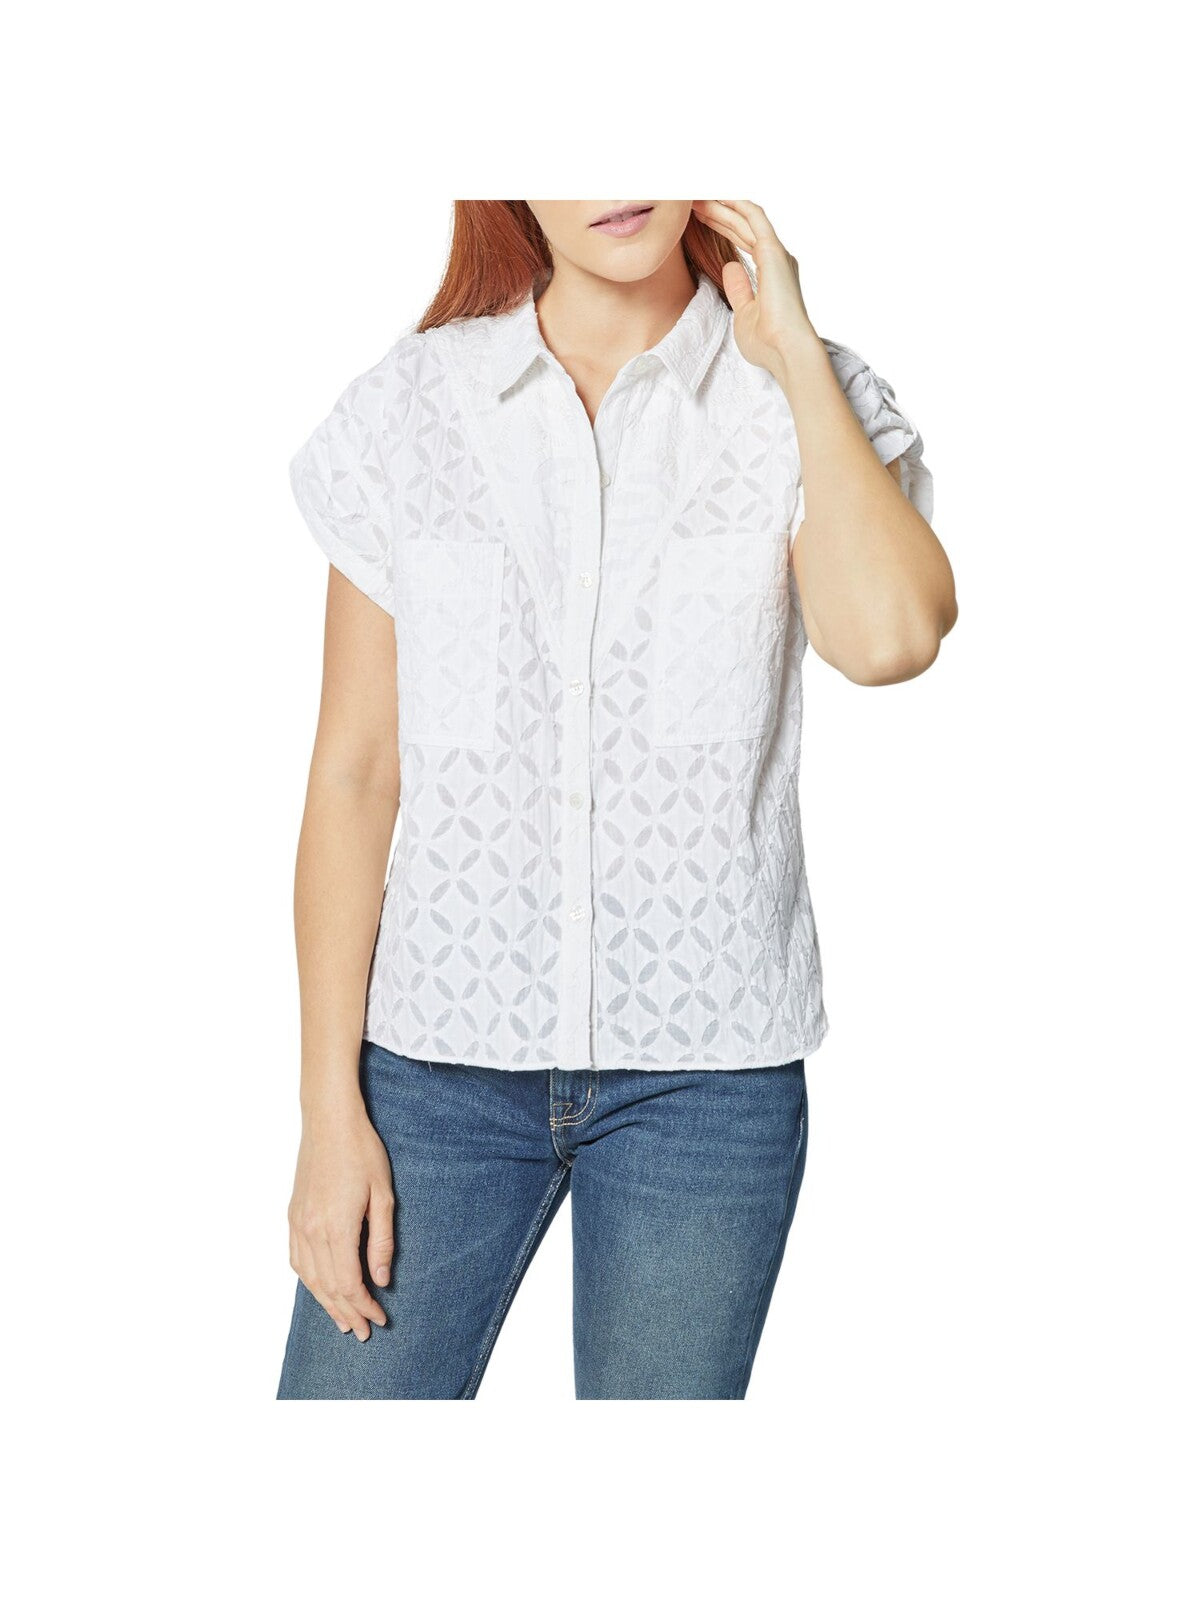 JOIE Womens White Pocketed Textured Shoulder Tabs Geometric Cap Sleeve Collared Wear To Work Button Up Top XS